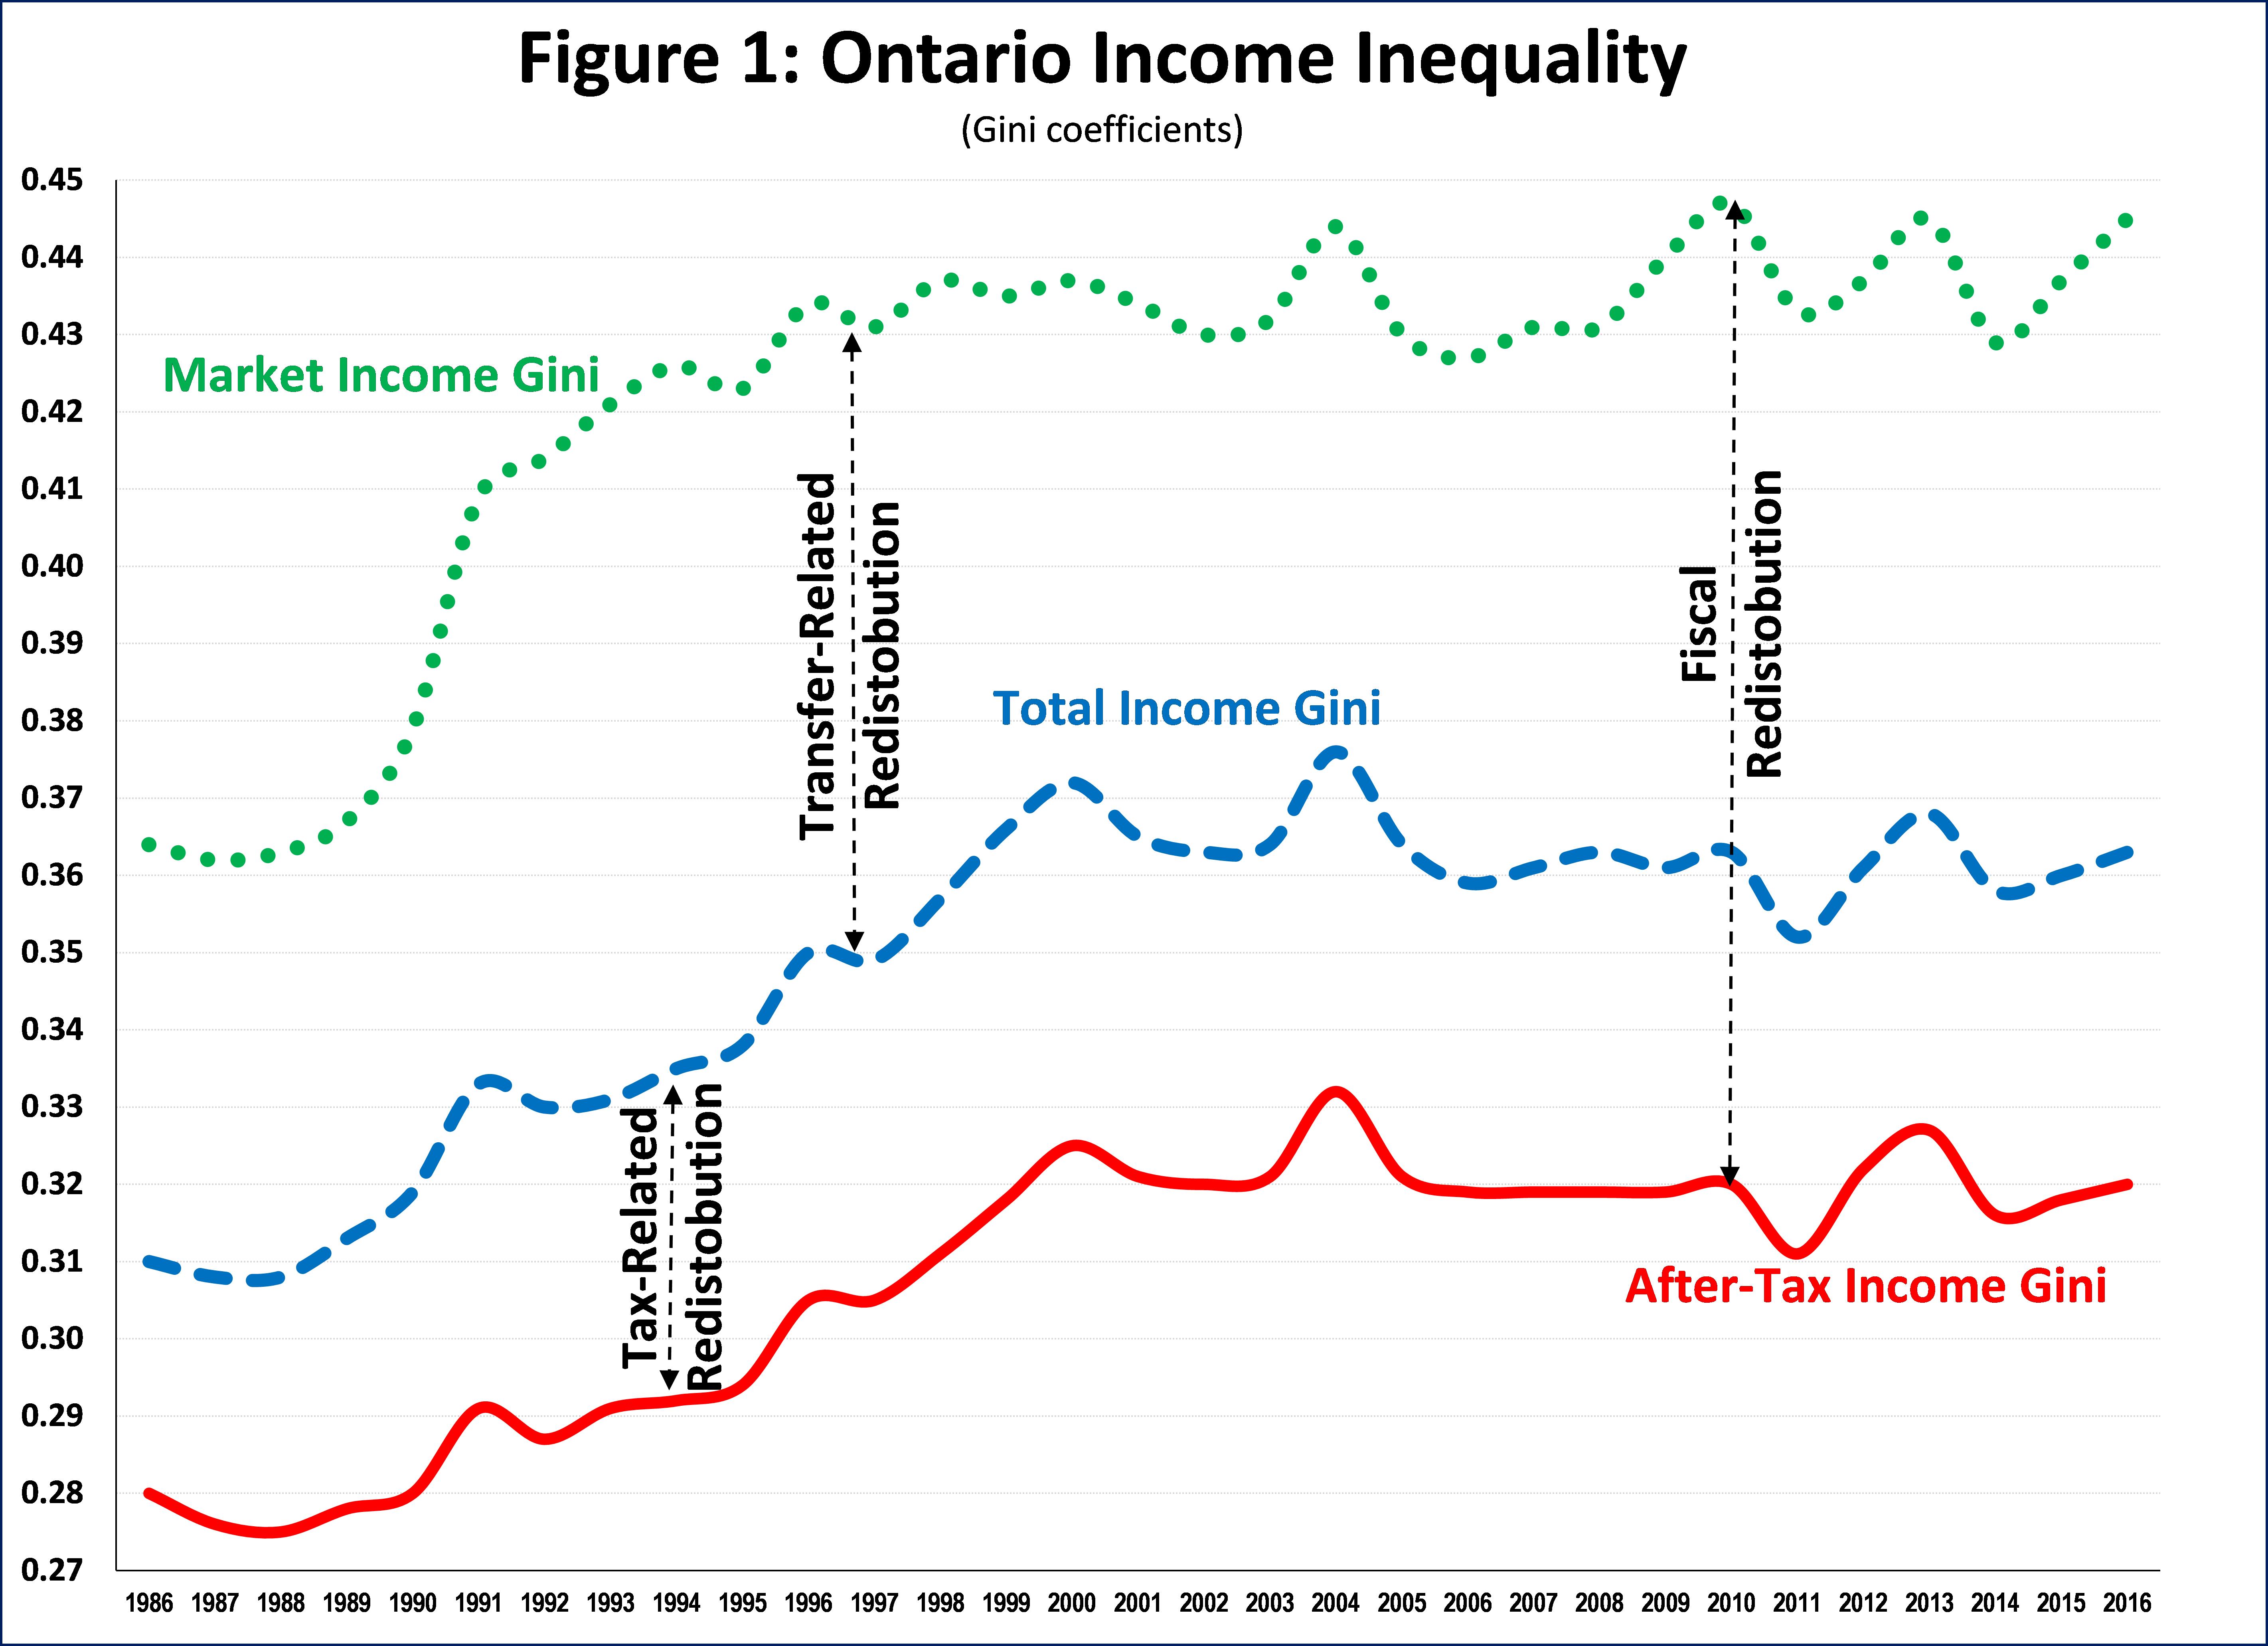 Ontario Election: Inequality Impacts of Fiscal Plans